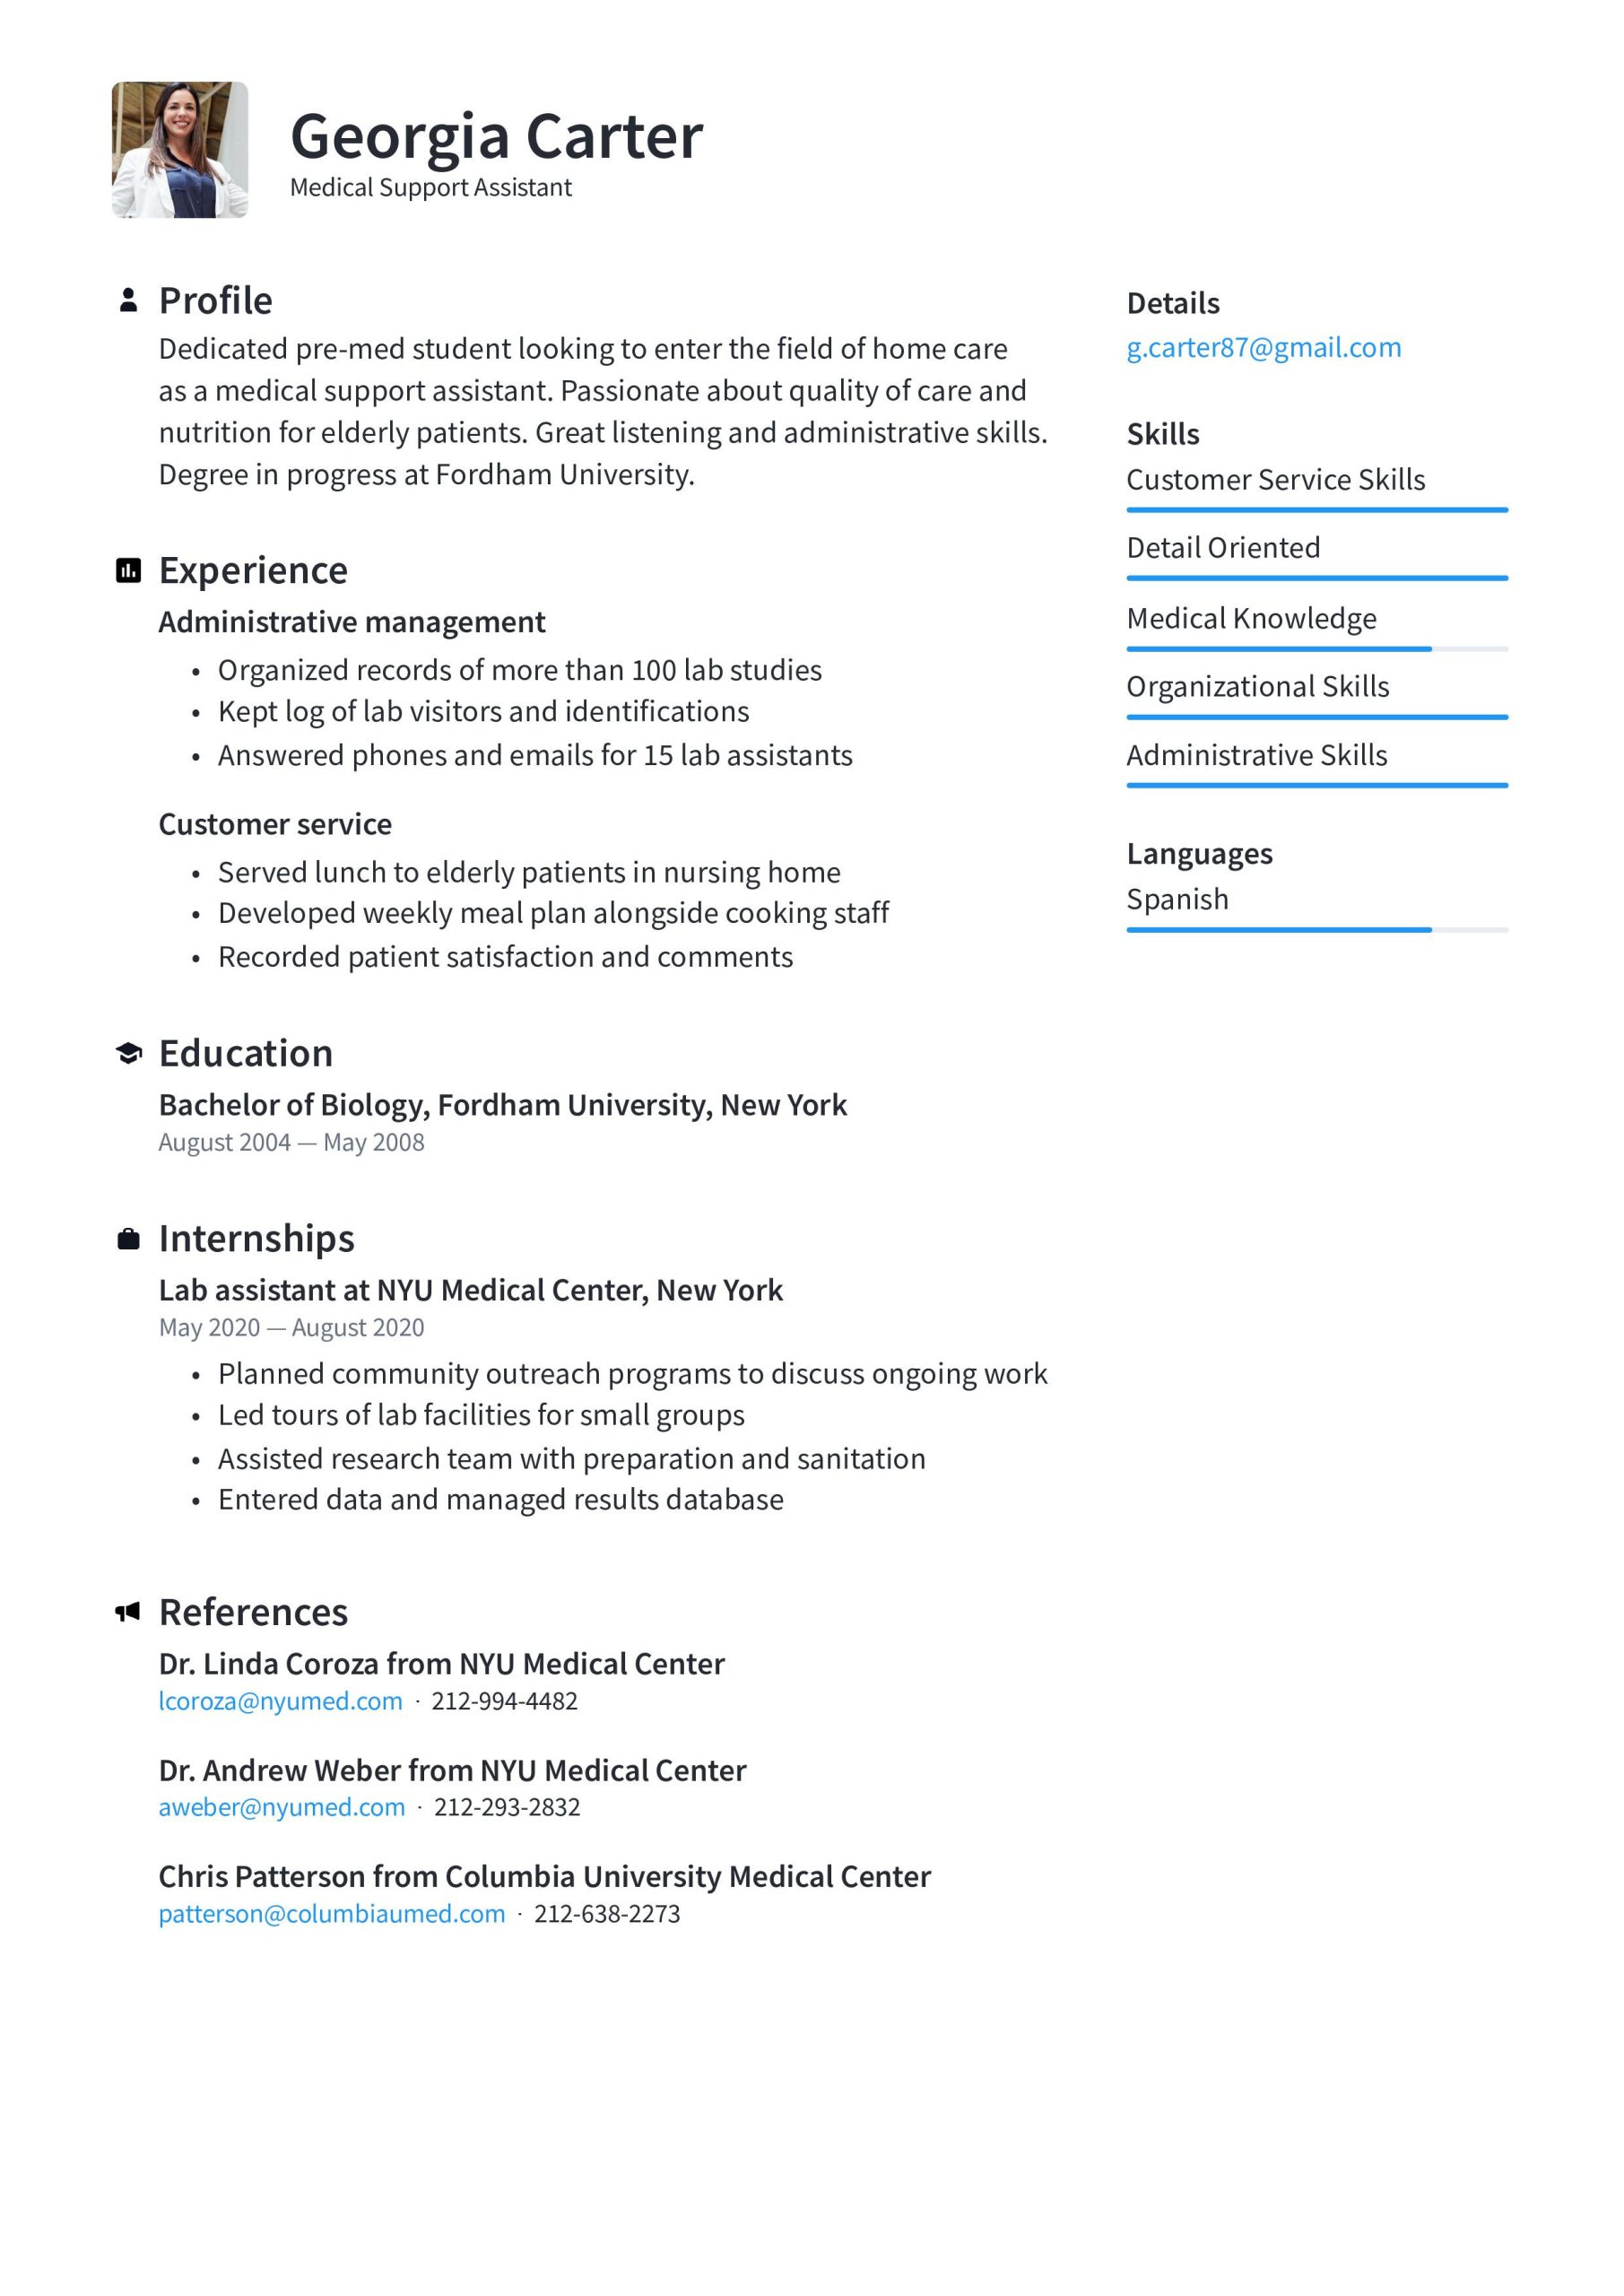 Samples Of Functional Resumes Customer Service Functional Resume format: Examples, Tips, & Free Templates